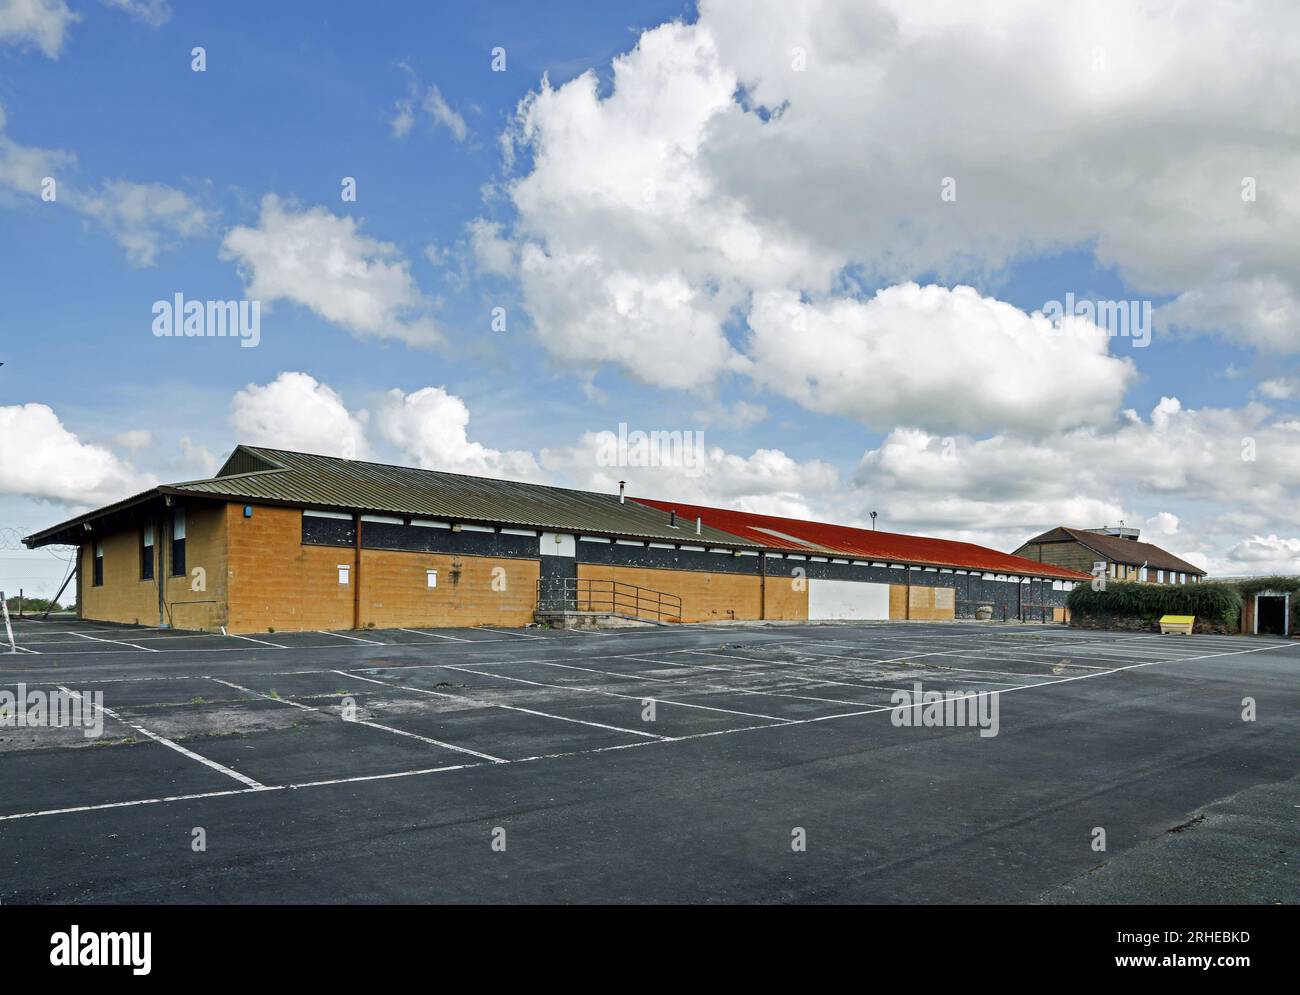 Plymouth City Airport at present, bricked up and deserted and still awaiting important decisions about its future. Some pressure groups want housing o Stock Photo